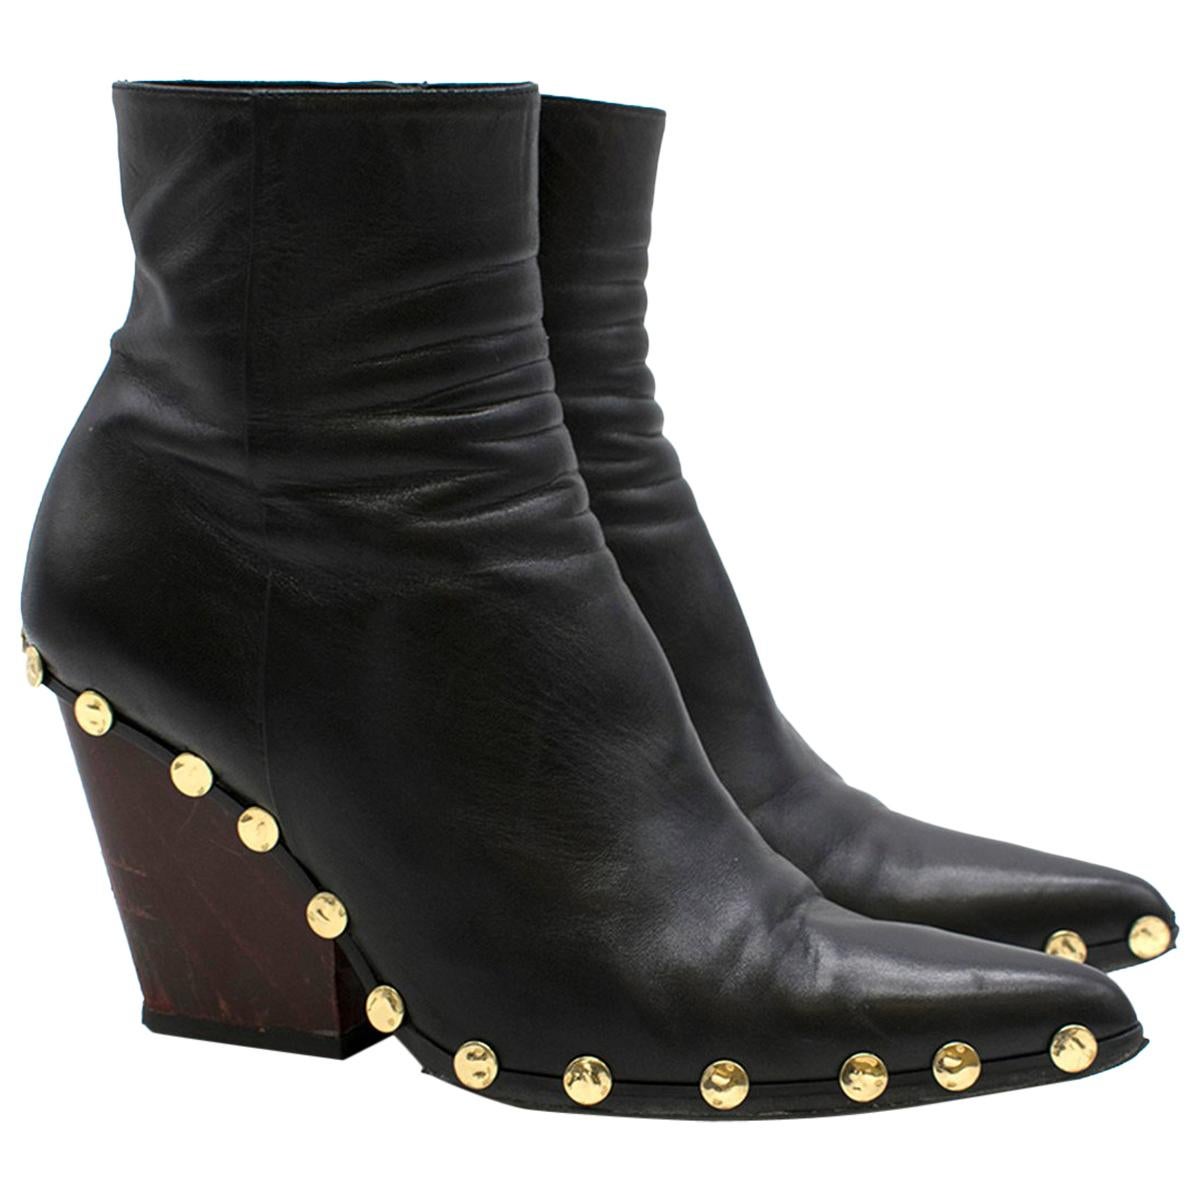 Celine Rodeo High Ankle Boot with Studs US 6.5